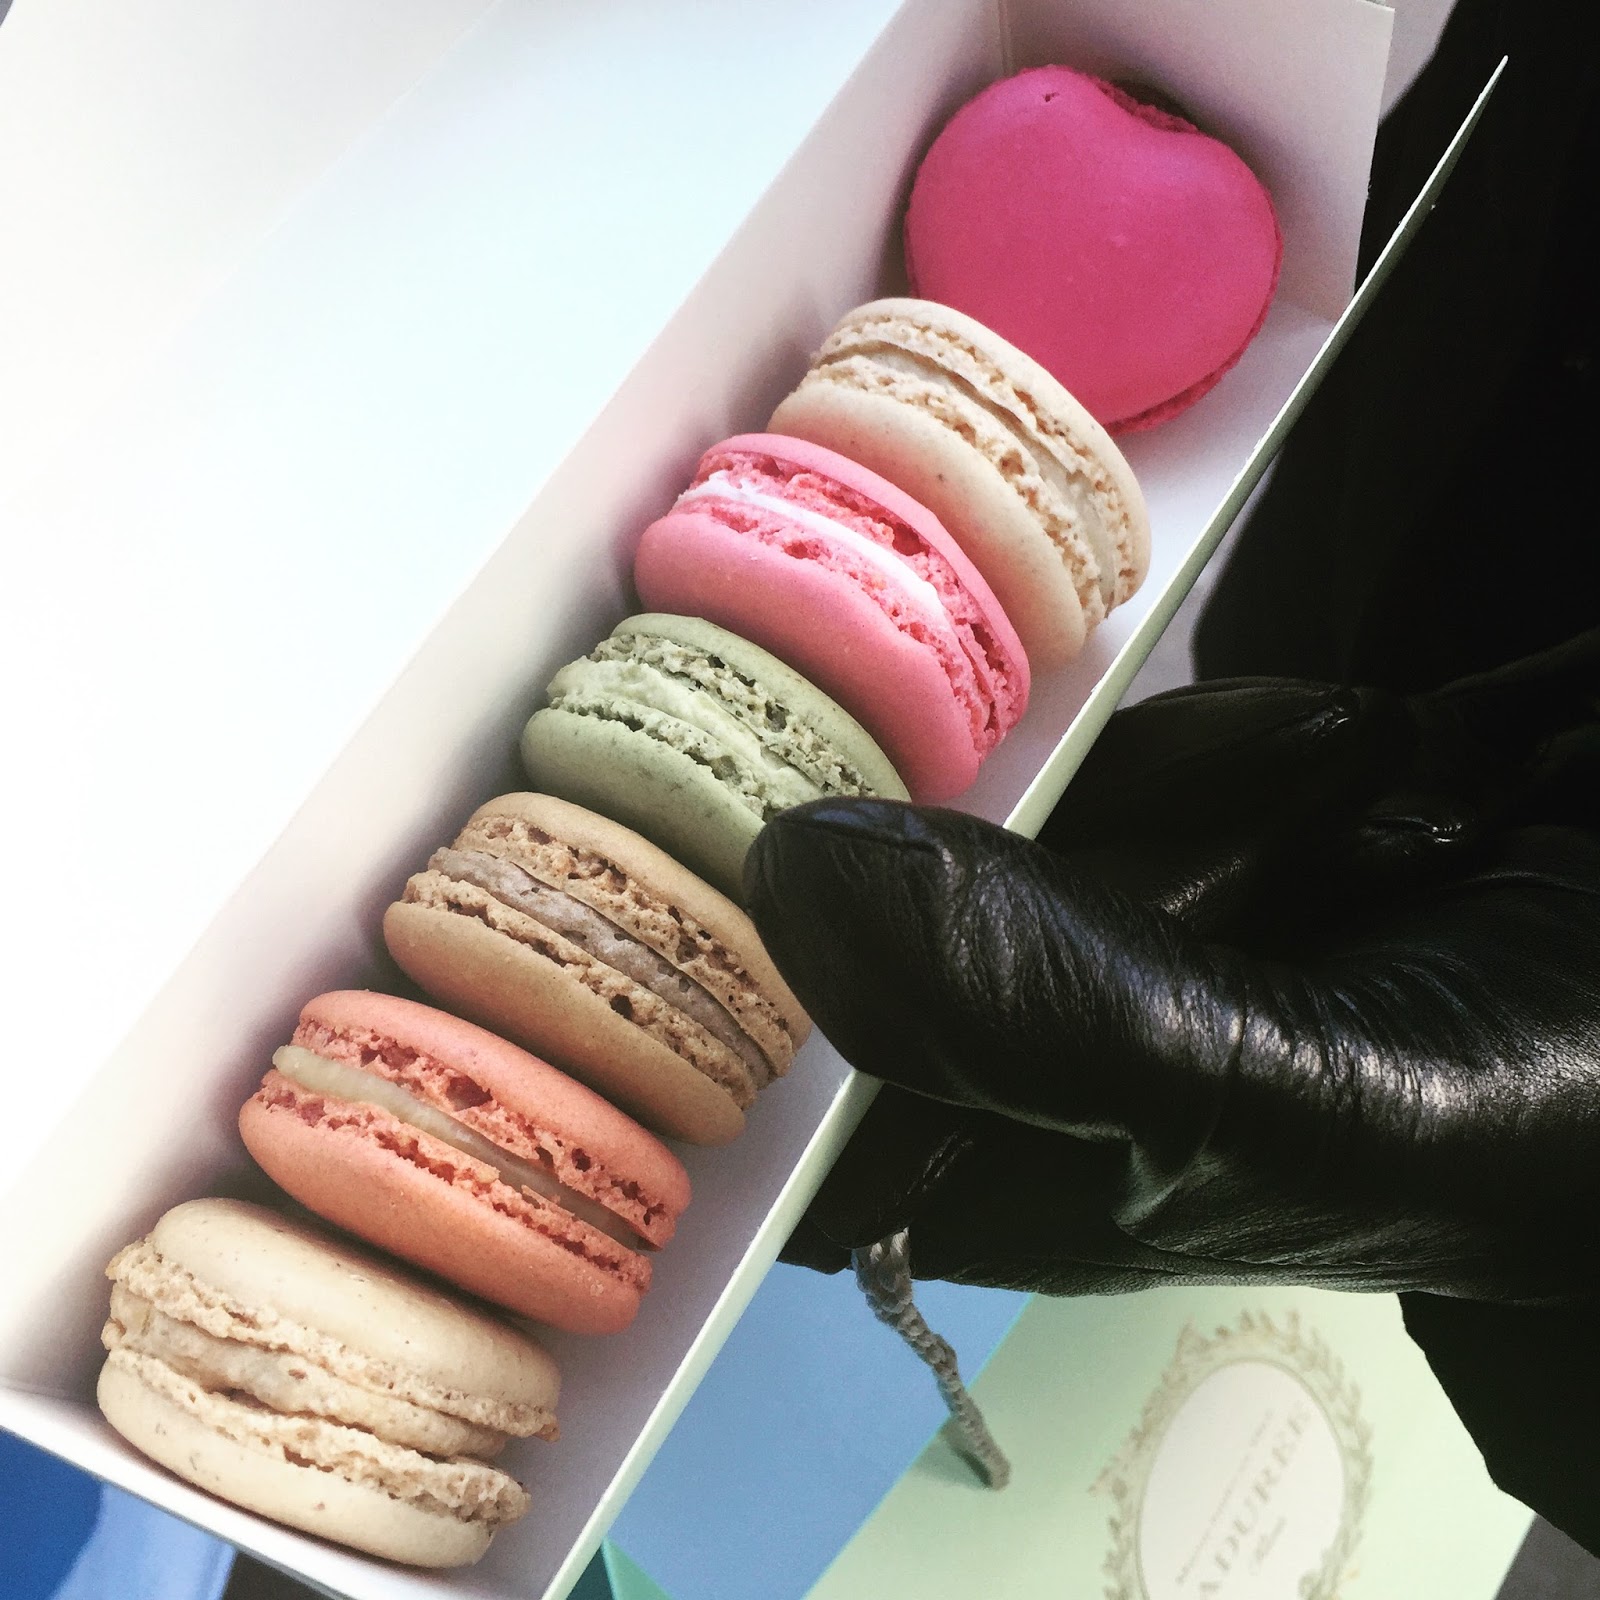 Kim's Reviews for Eating Out Across the Globe: Laduree, London